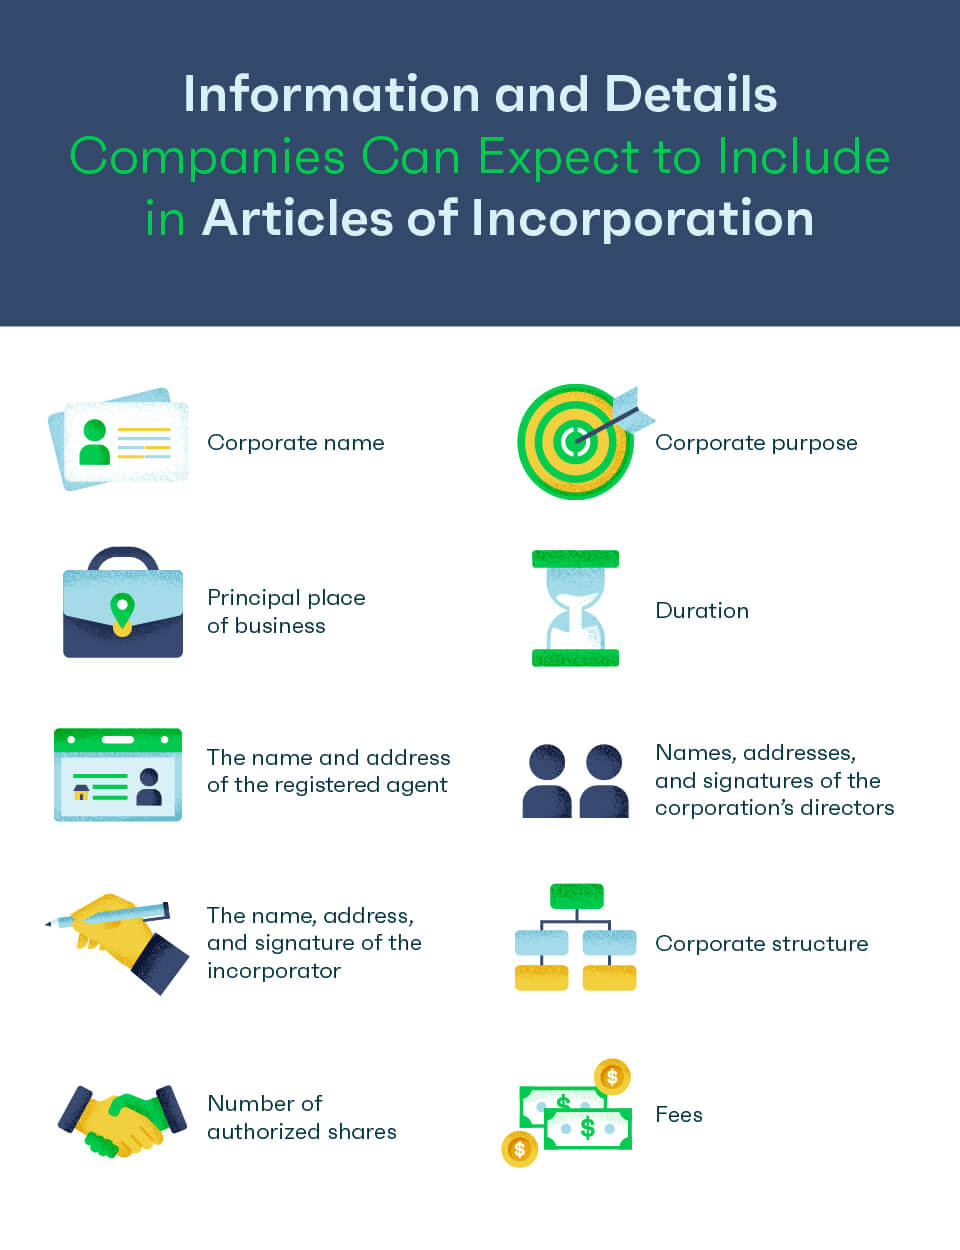 Infographic: Information and Details Companies Can Expect to Include in Articles of Incorporation